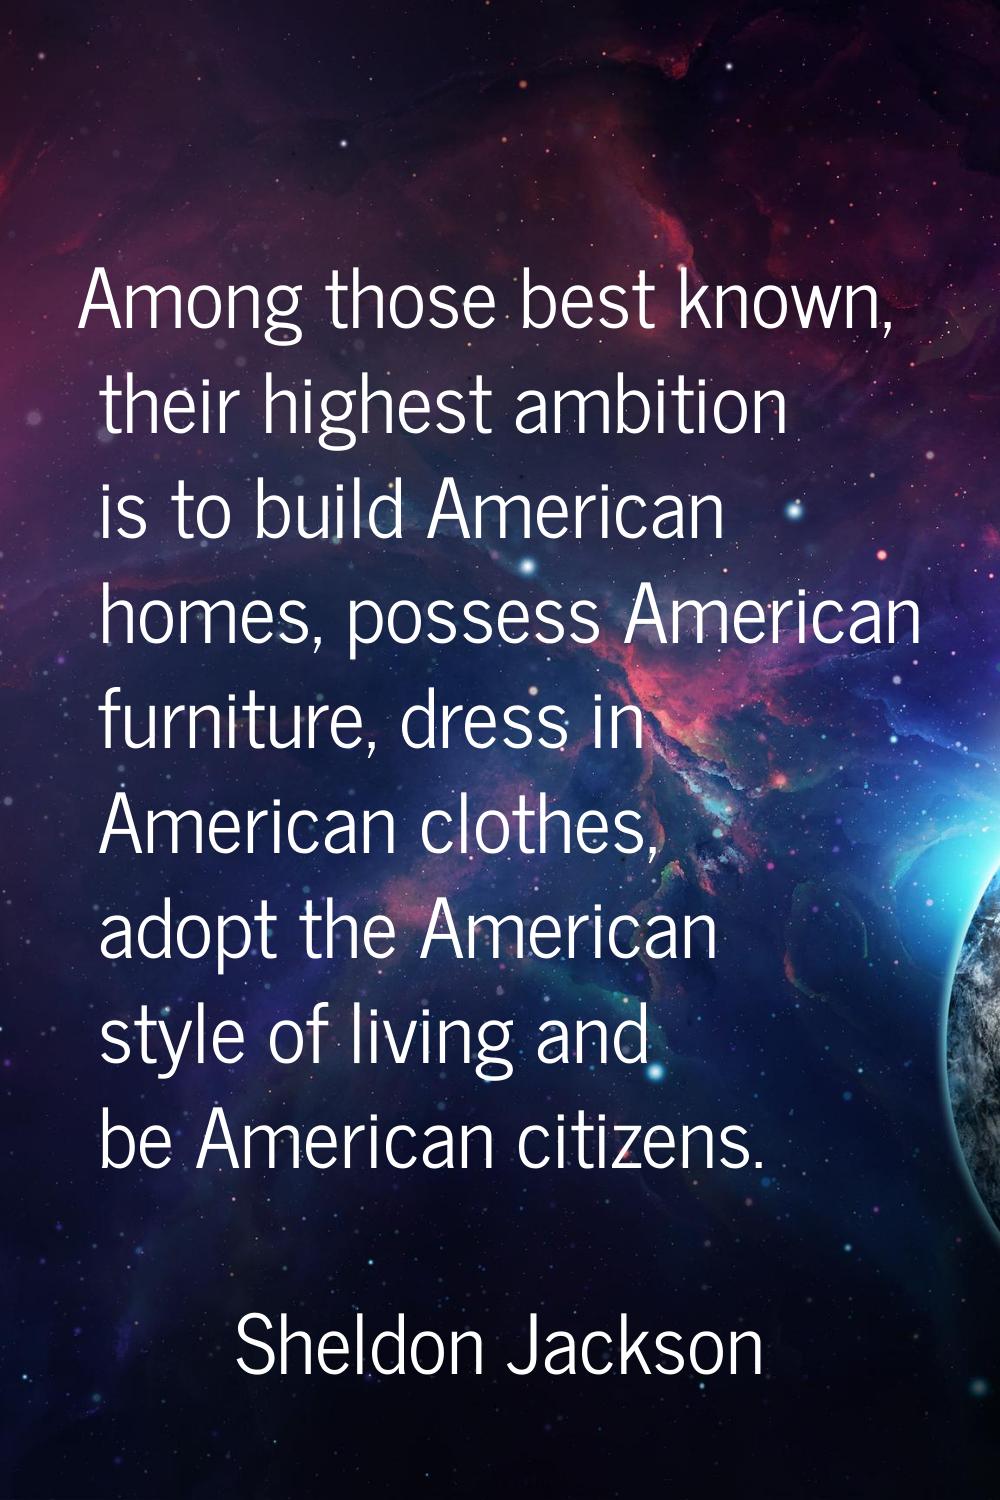 Among those best known, their highest ambition is to build American homes, possess American furnitu